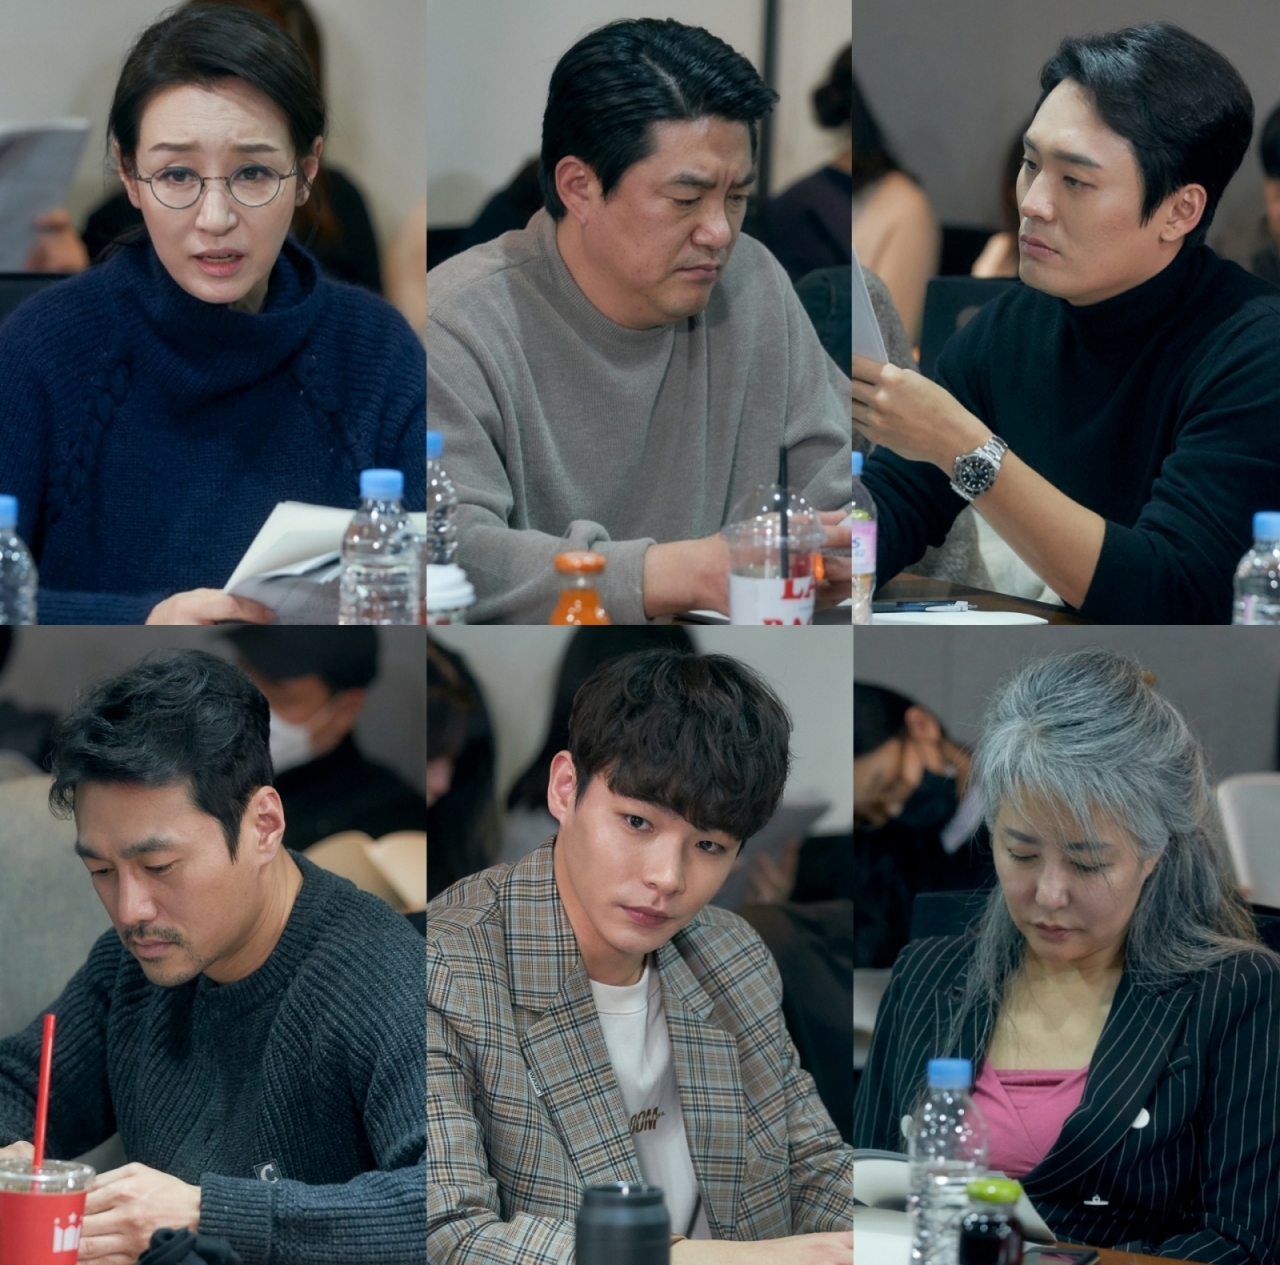 TVNs new tree Drama Flower of Evil has unveiled a lineup full of anticipation with a script reading scene featuring Lee Joon-gi, Moon Chae-won, Jang Hee-jin and Seo Hyeon-woo.What if Husband, who has loved him for 14 years, is a Jennifer 8 horse with no blood or tears?The TVN new tree drama Flower of Evil is a high-density emotional tracking drama of two people who are in front of the truth that they want to hide the cruel past and change their identity, Lee Joon-gi, a homicide detective wife who traces his past, and Cha Ji-won, a homicide wife.In the script reading scene that announced the start of the full-scale voyage, director Kim Chul-gyu of the luxury director who goes to and from the melodrama and thriller, writer Yoo Jung-hee who is attracting attention with solid writing power, and Lee Joon-gi, Moon Chae-won, Jang Hee-jin (Dohaesu Station), Seo Hyeon-woo (Kim Moo-jin Station) Actors, who believed in the axis, were all in a hurry.Lee Joon-gi, who was divided into a man who hid the past like a time bomb in the play and even played love, completed the breathtaking tightrope of the extreme, and Moon Chae-won showed a different pattern of acting with the double charm of his lovely wife and charismatic powerful Detective car.Above all, if the two melodramatic couple Chemie made the scene hot, the delicate Acting, which is suspicious of each other, filled the scene with breathtaking tension.In the Flower of Evil, which is expected to be an ensemble of four leading characters, Actors, who do not have any good words such as Kim Ji-hoon, Choi Byung-mo, Son Jong Hak, Nam Ki Ae and Yoon Byung Hee,It is said that the production teams ambitious aspiration to make it impossible to let go of the tension as the additional impact figures continue to appear until the middle and late.In addition, the four-color, four-color, four-color, three-color, four-color, three-color, three-color, three-color, three-color, three-color, three-color, three-color, three-color, three-color, three-color, three-color, three-color, three-color, three-color, three-color, three-color, three-color, three-color, three-color, three-color, three-color, three-color, three-color, three-color, three-color, four-color, four-color, four-color, four-color, three-color, three-color,TVN New Tree Drama Flower of Evil will be broadcasted for the first time in July.